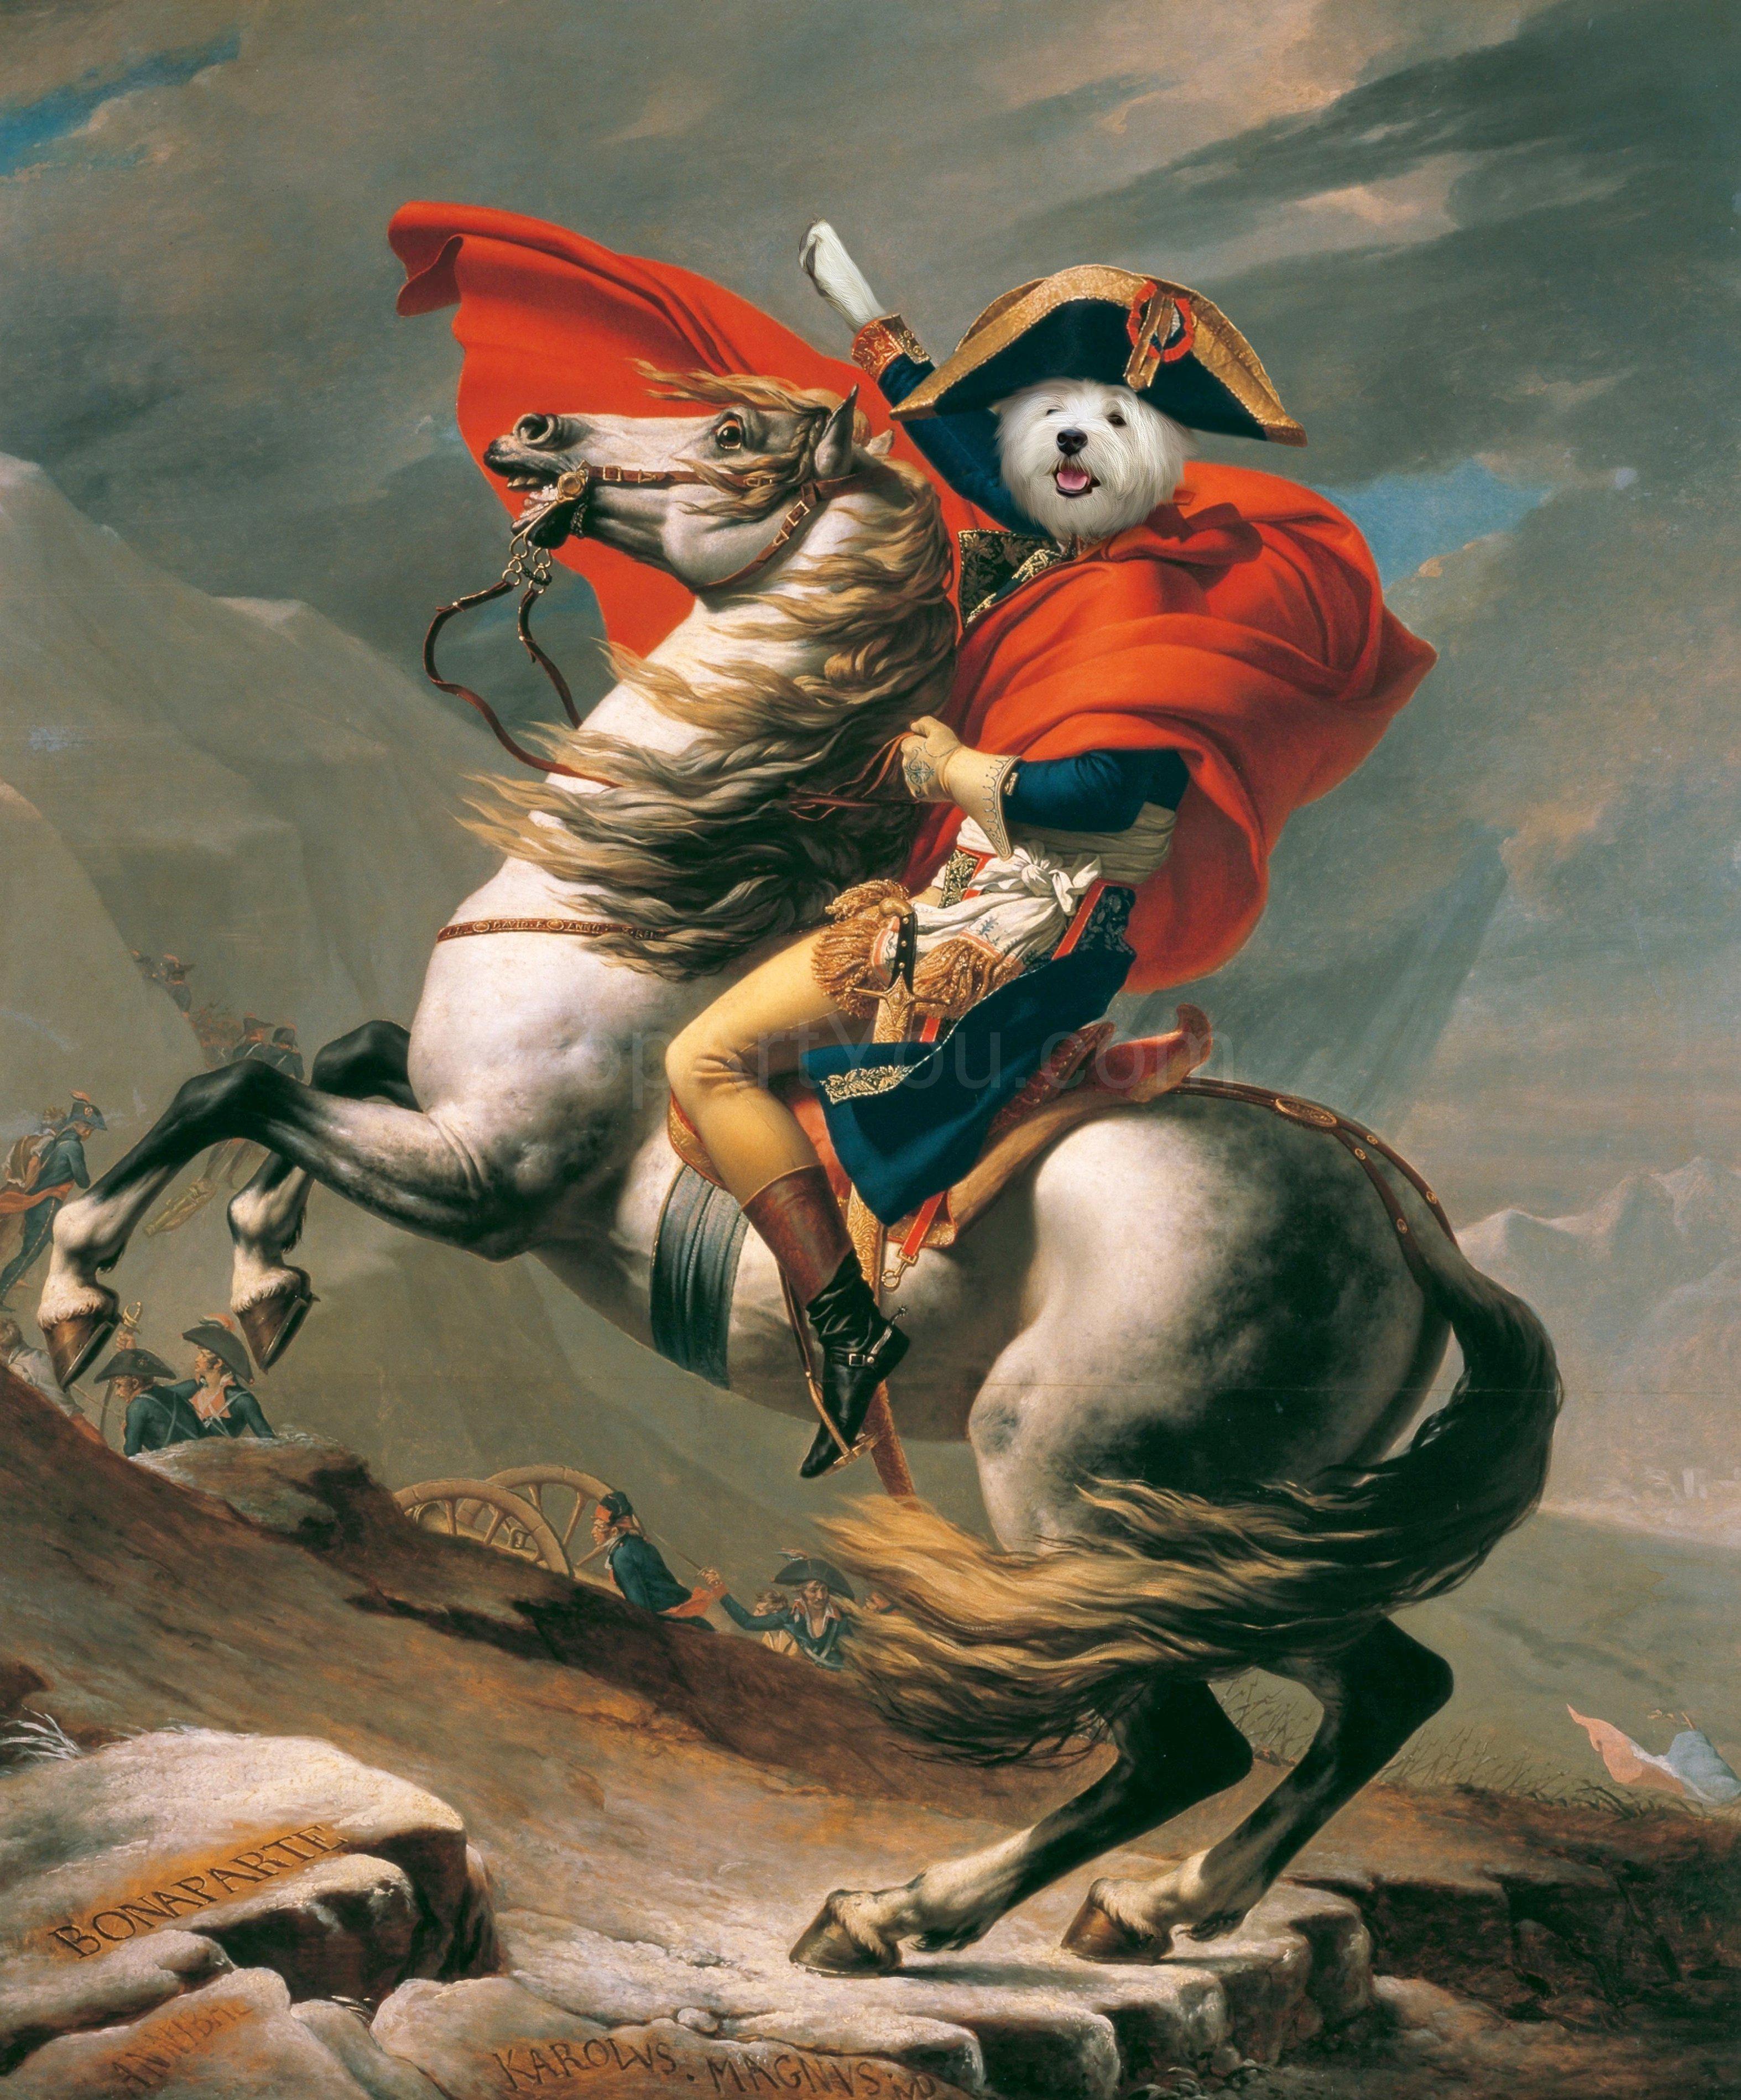 The portrait shows a dog with a human body dressed in a red Napoleon costume riding a horse